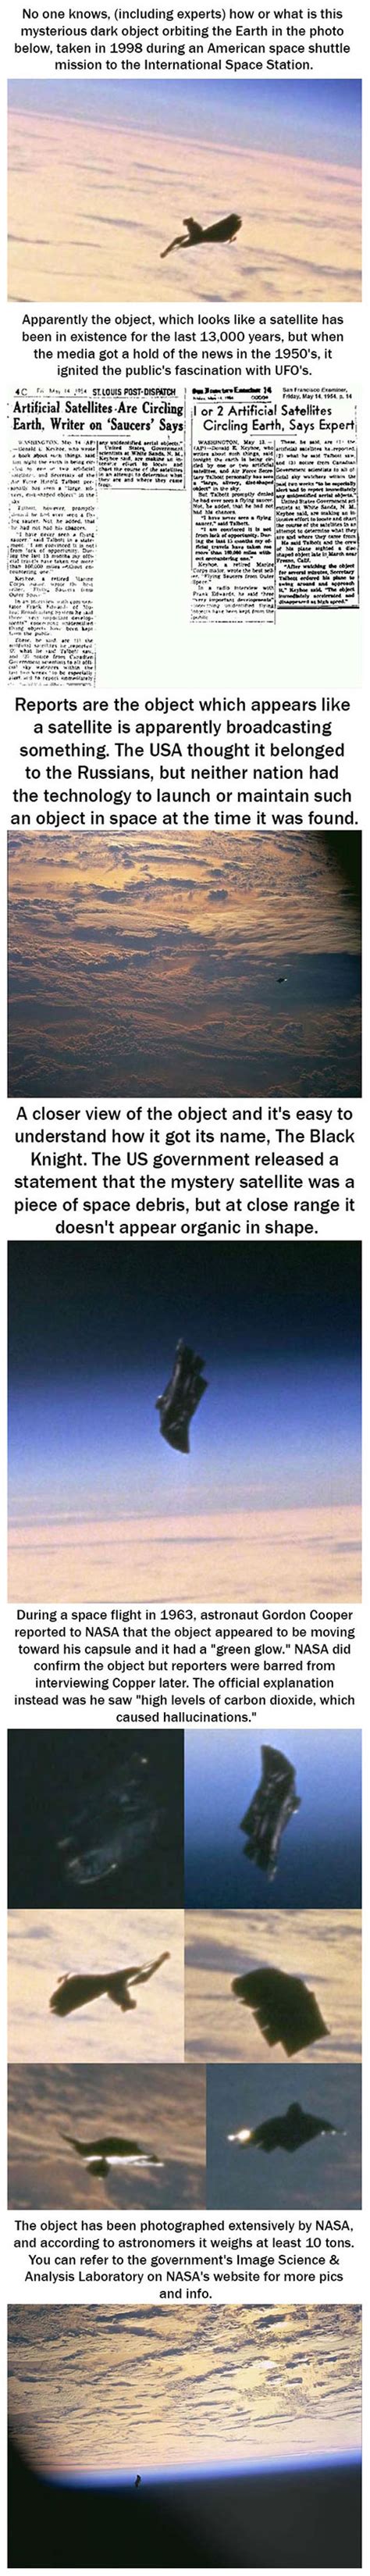 13000 Year Old Black Knight Satellite Spotted In Front Of The Iss